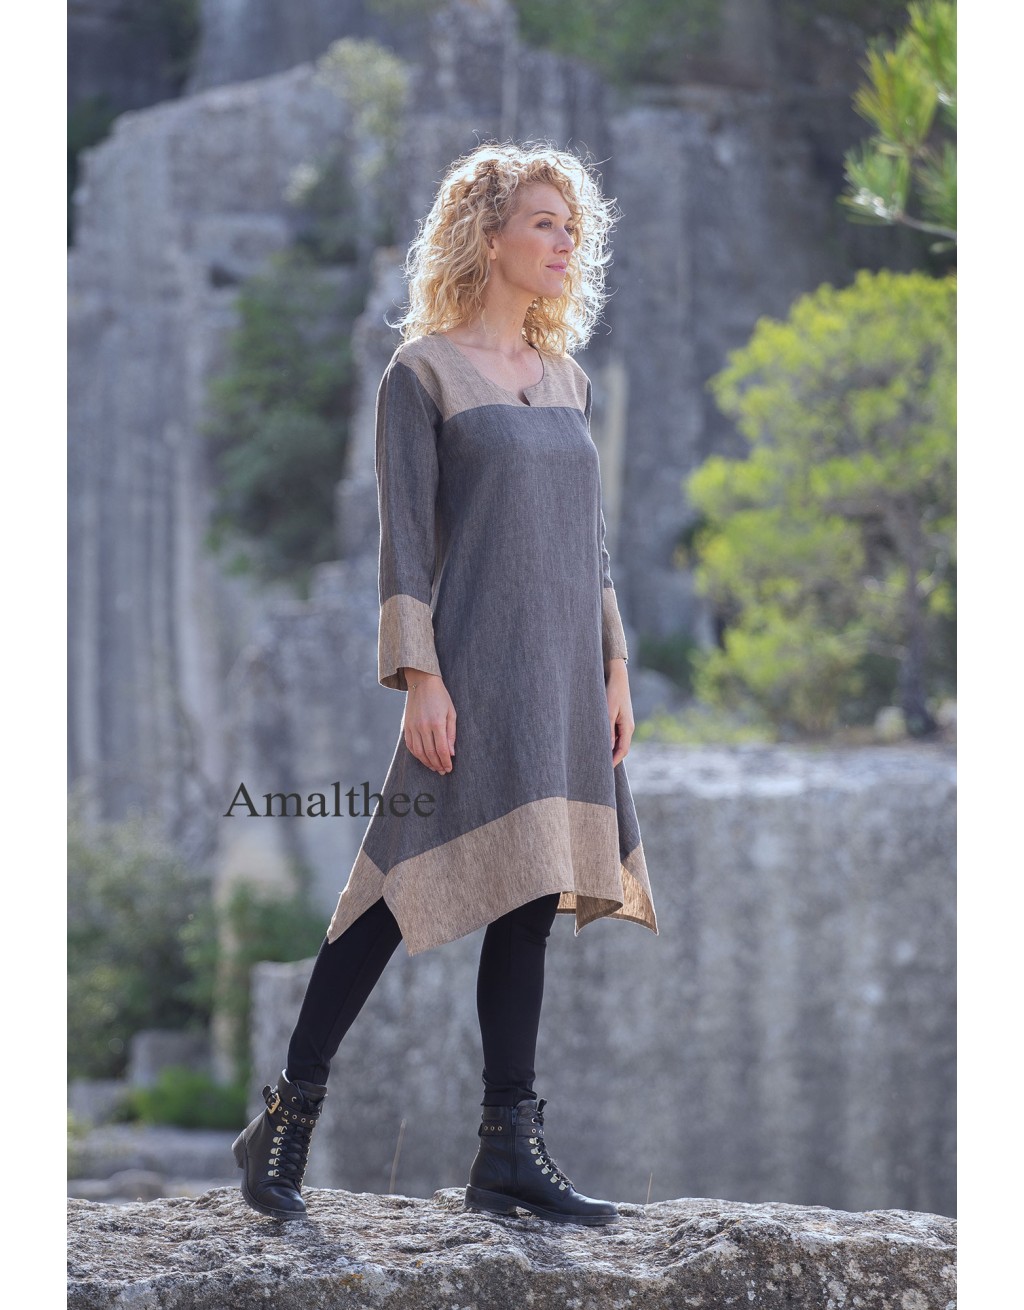 Two-tone Elisa tunic, anthracite / taupe gray dress version over black jeggings or denim blue linen pants